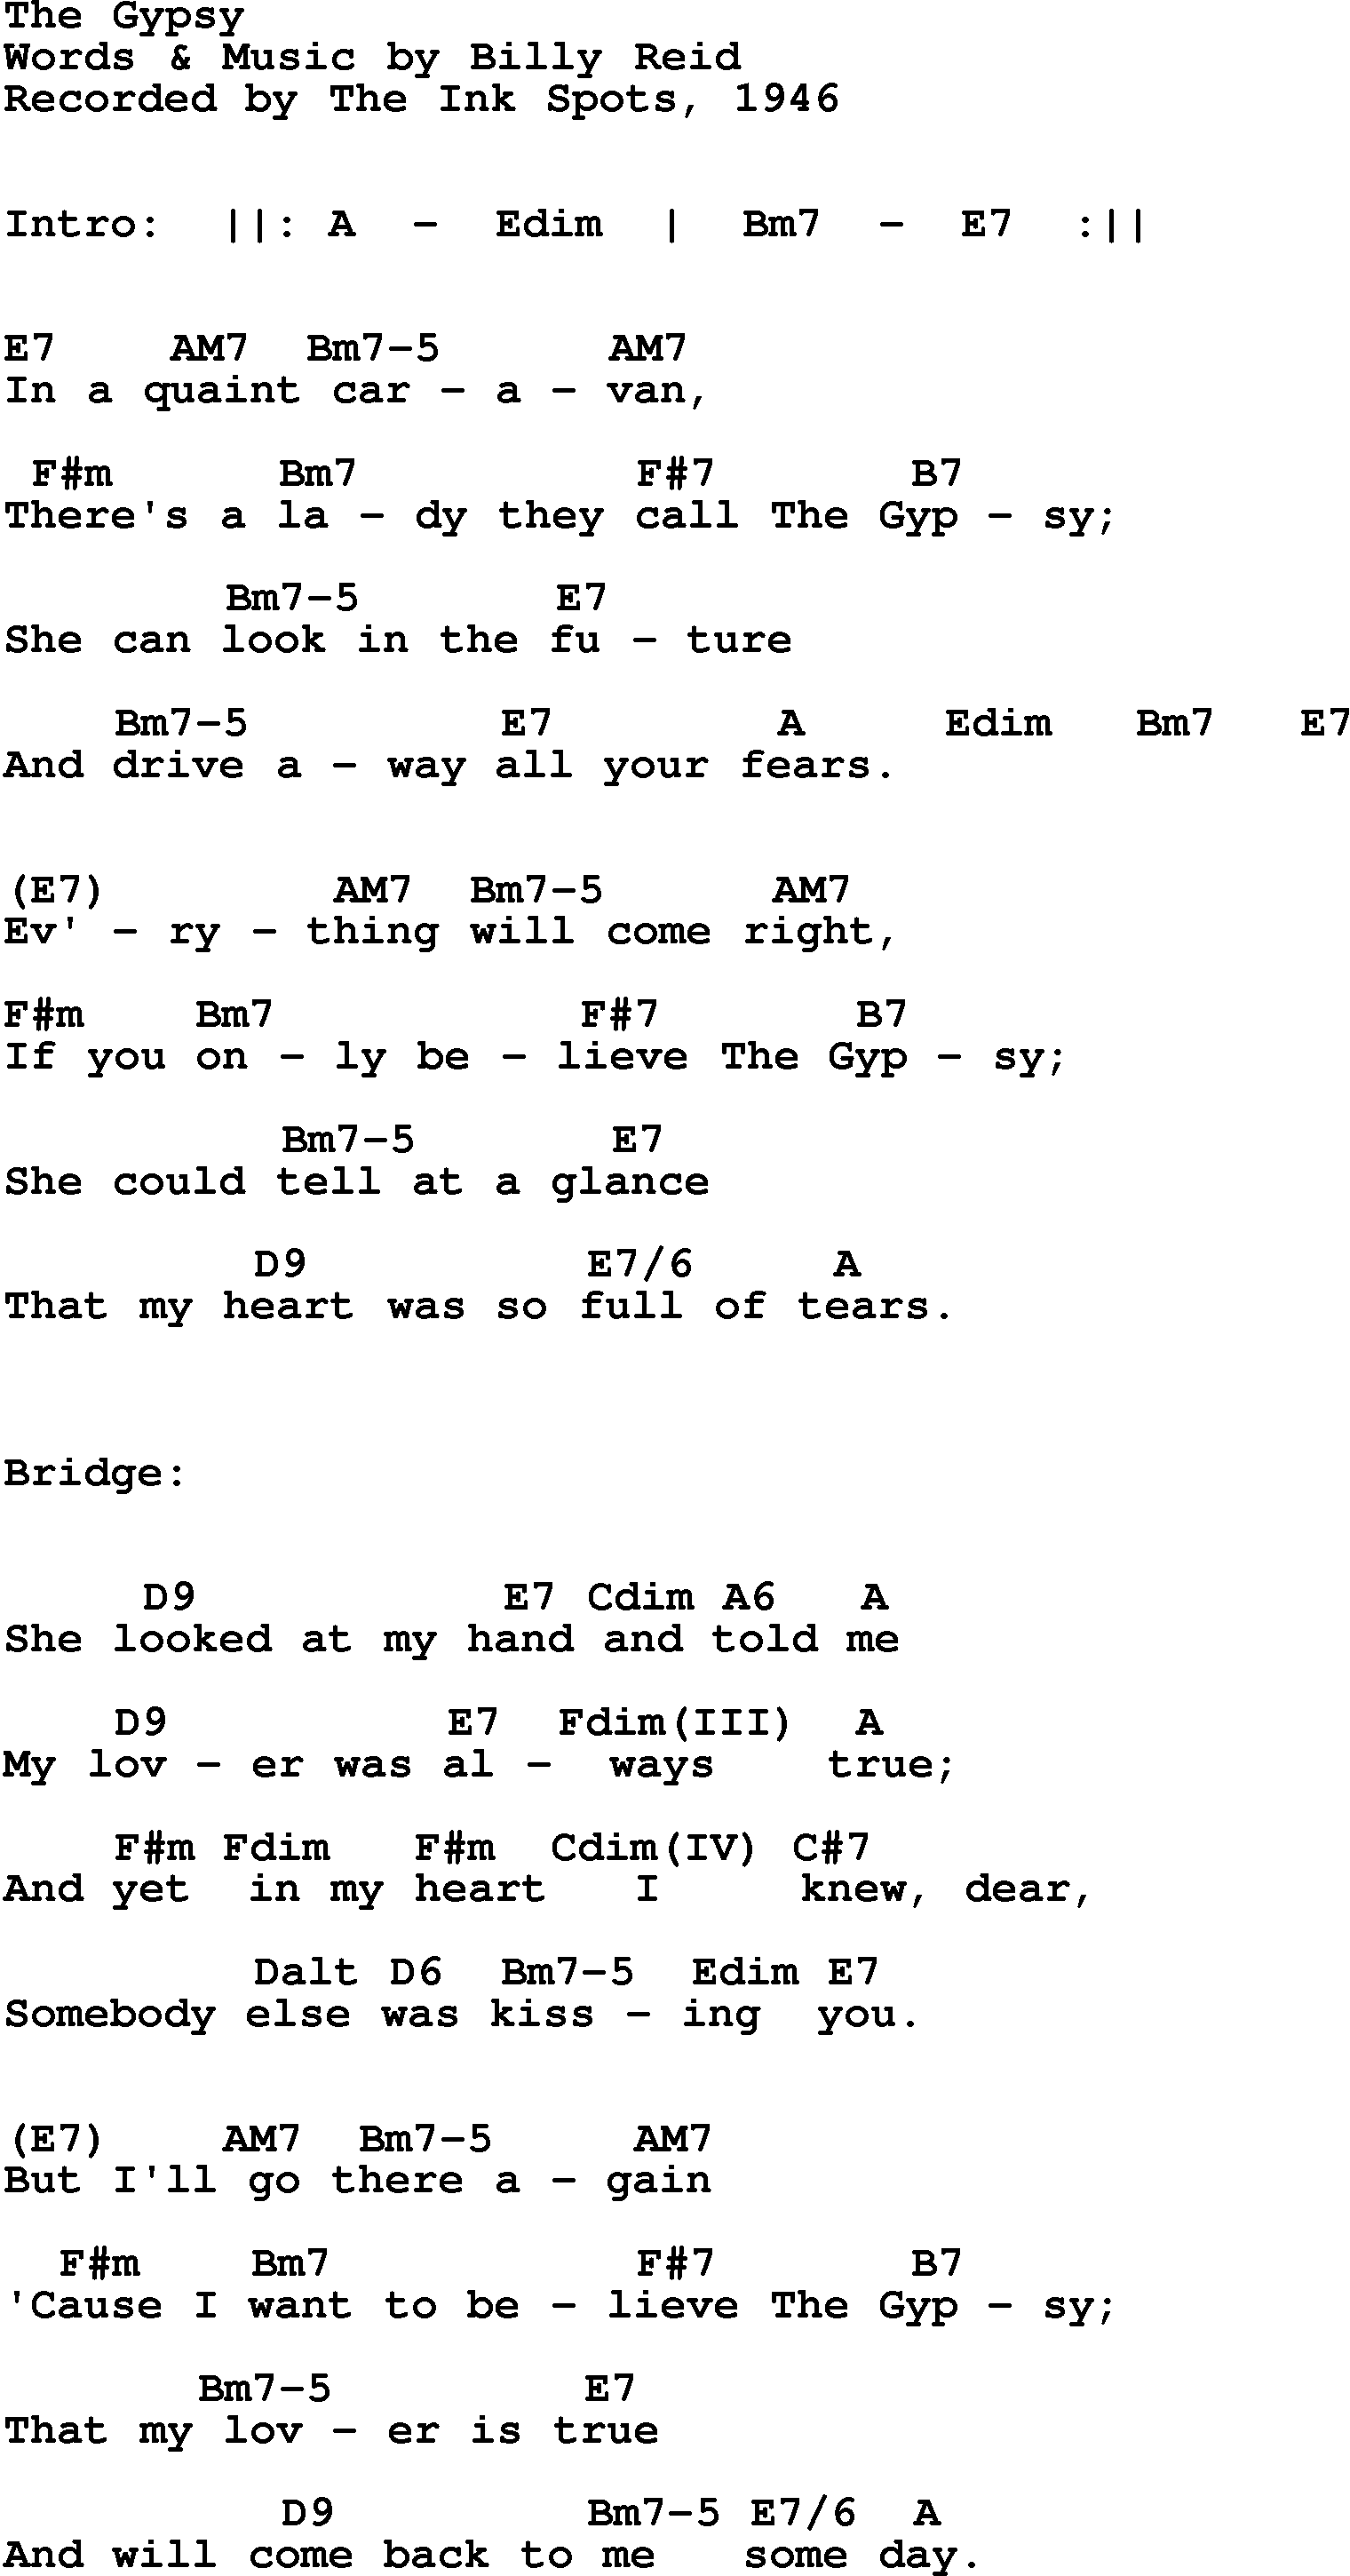 Song Lyrics with guitar chords for The Gypsy - Ink Spots, 1946